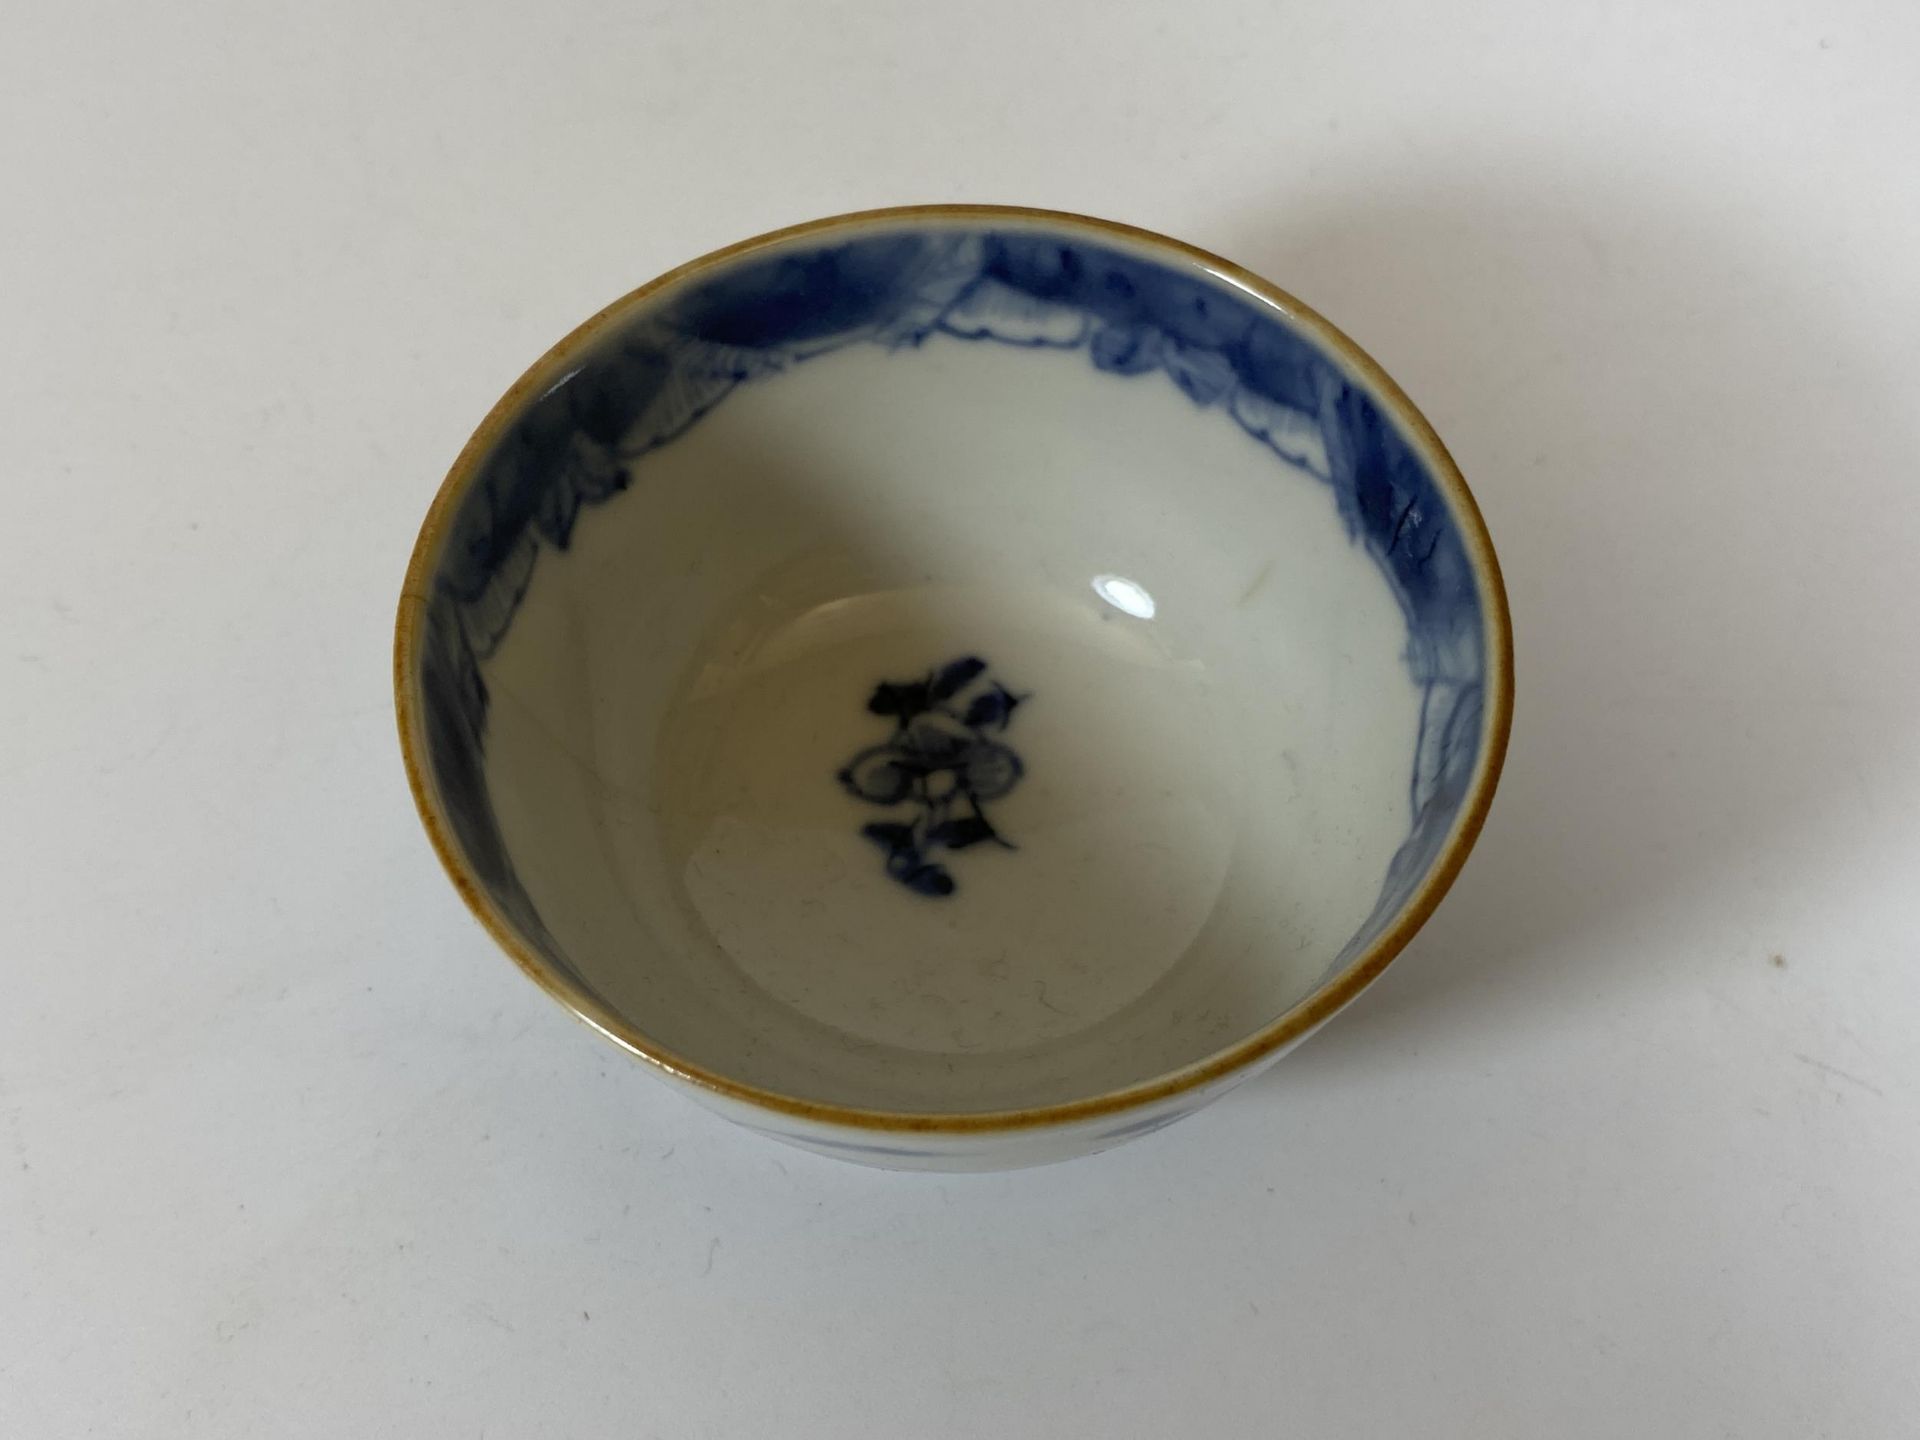 A 19TH CENTURY QING CHINESE BLUE AND WHITE PORCELAIN TEA BOWL, HEIGHT 4.5CM - Image 3 of 5